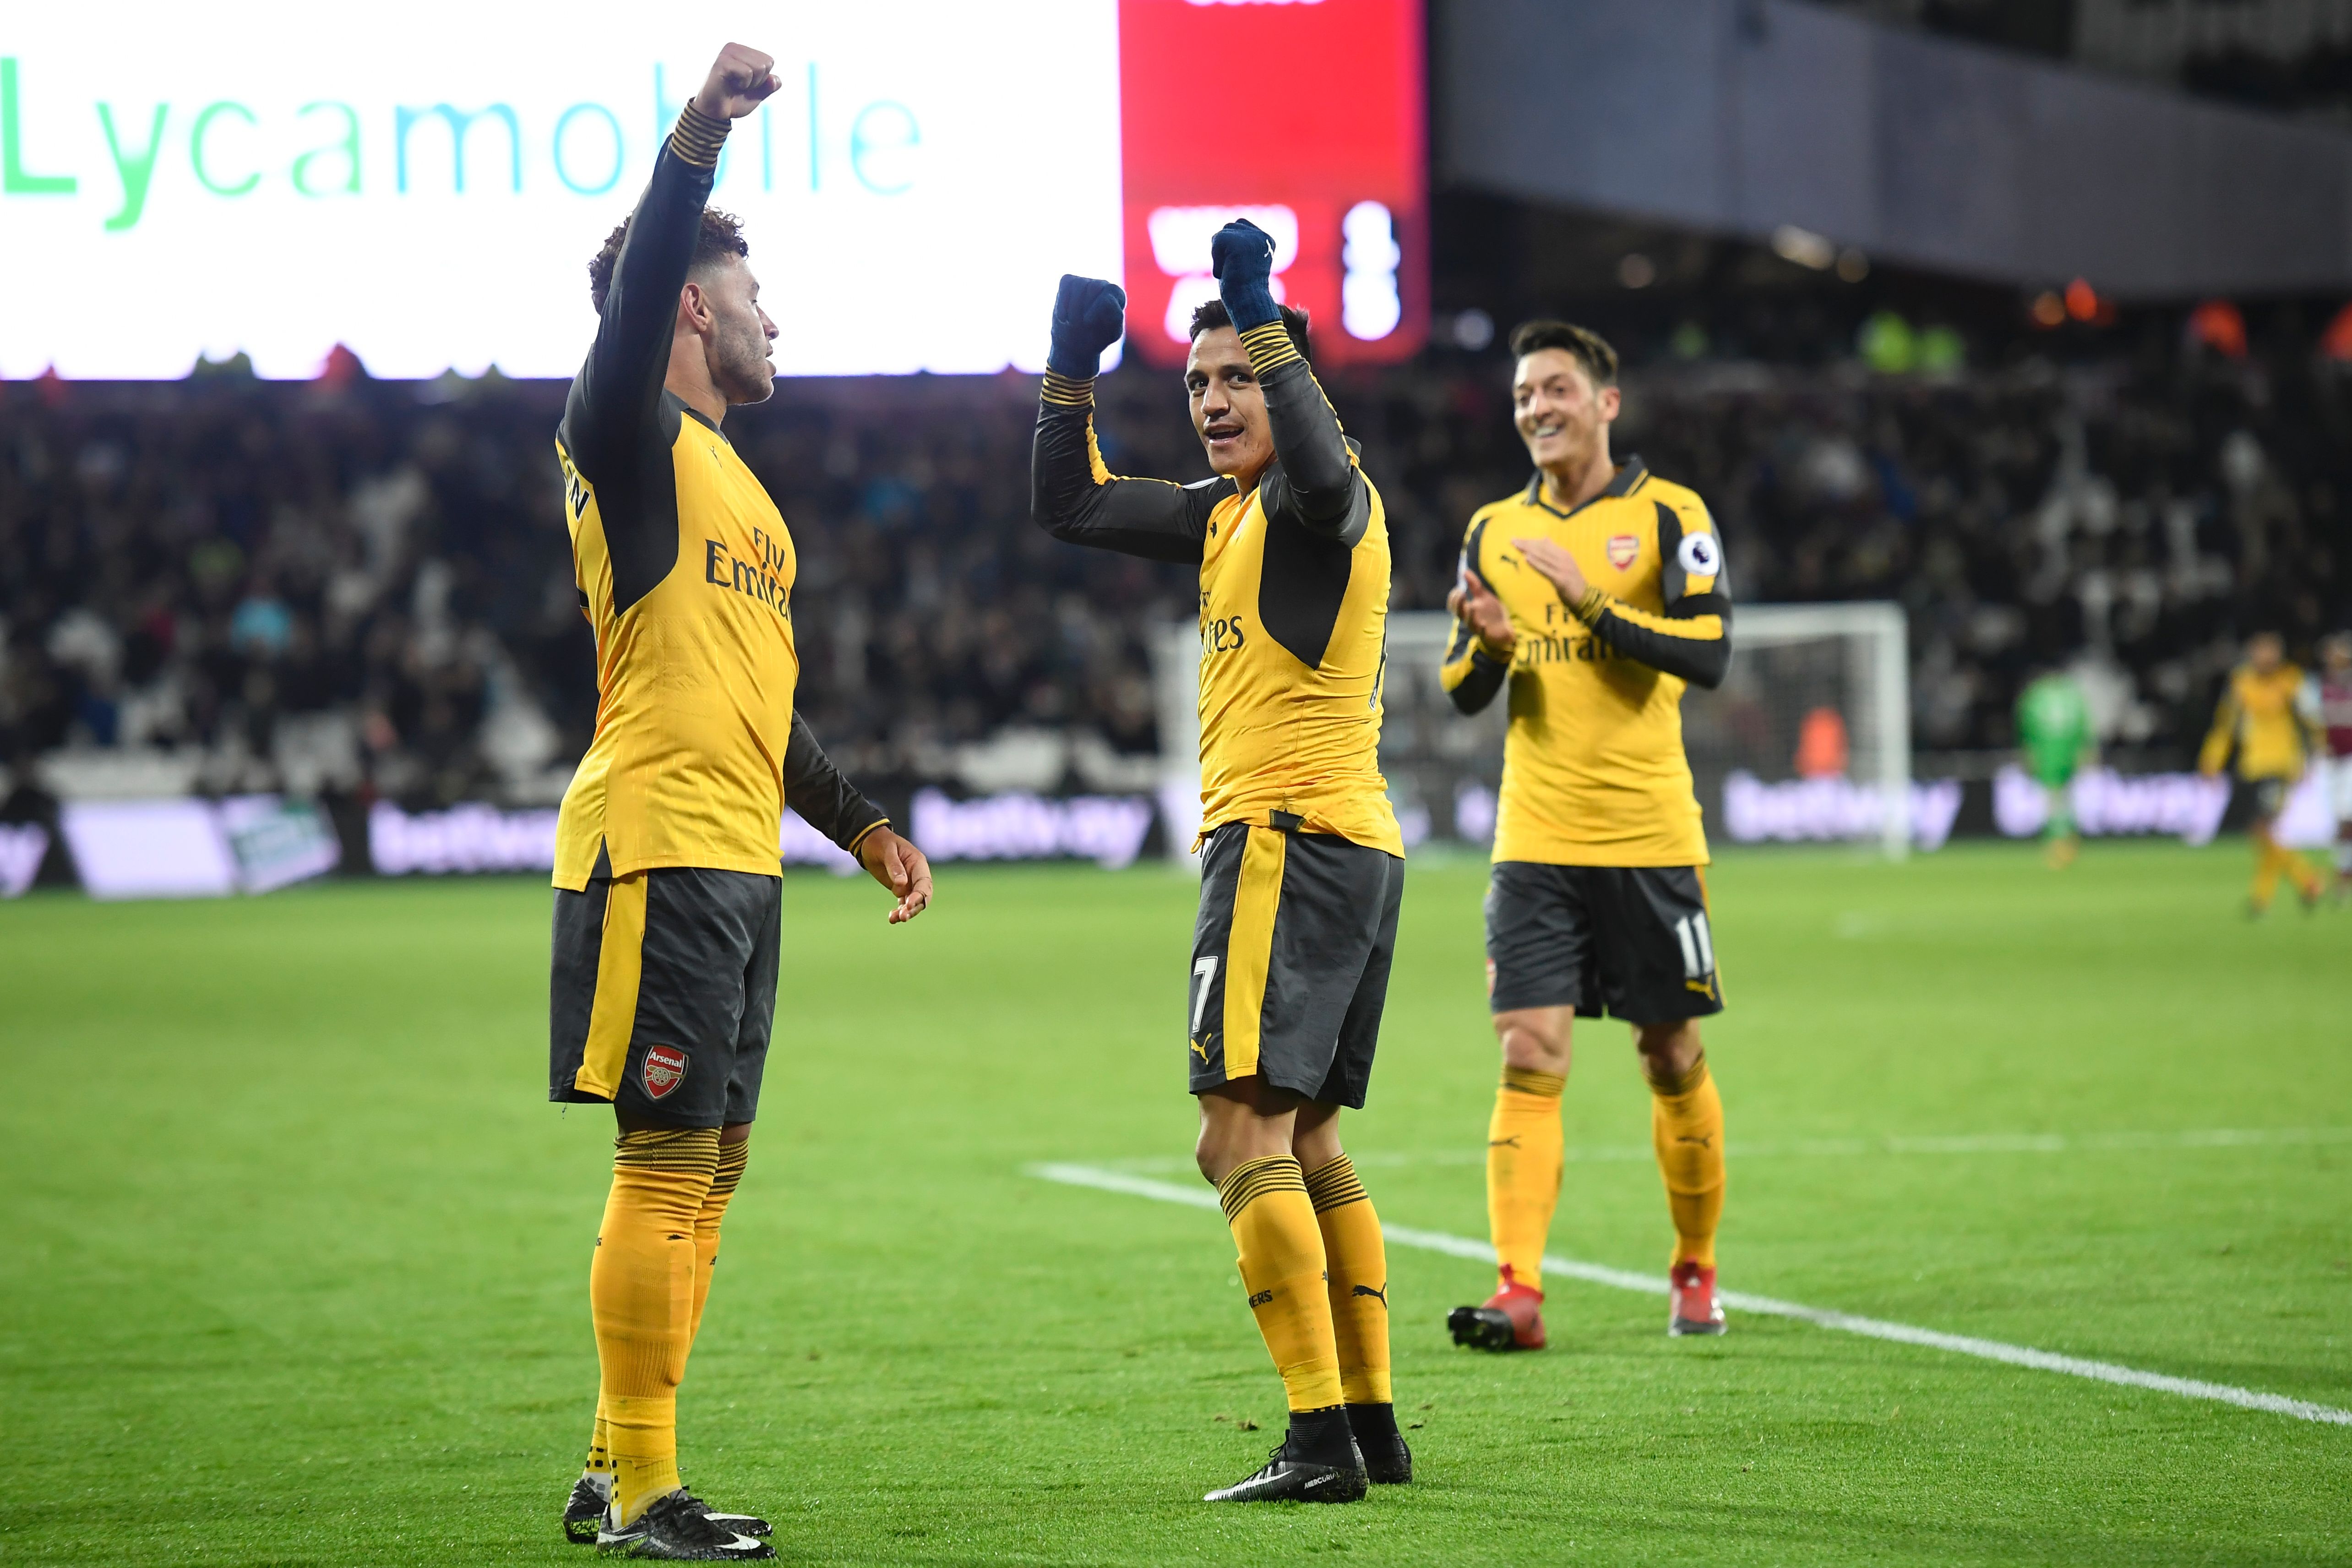 The three goal-scorers, Arsenal's English midfielder Alex Oxlade-Chamberlain (L), Arsenal's Chilean striker Alexis Sanchez (C) and Arsenal's German midfielder Mesut Ozil (R) celebrate Sanchez's third goal, the team's fifth, during the English Premier League football match between West Ham United and Arsenal at The London Stadium, in east London on December 3, 2016.
Arsenal won the game 5-1. / AFP / Justin TALLIS / RESTRICTED TO EDITORIAL USE. No use with unauthorized audio, video, data, fixture lists, club/league logos or 'live' services. Online in-match use limited to 75 images, no video emulation. No use in betting, games or single club/league/player publications.  /         (Photo credit should read JUSTIN TALLIS/AFP/Getty Images)